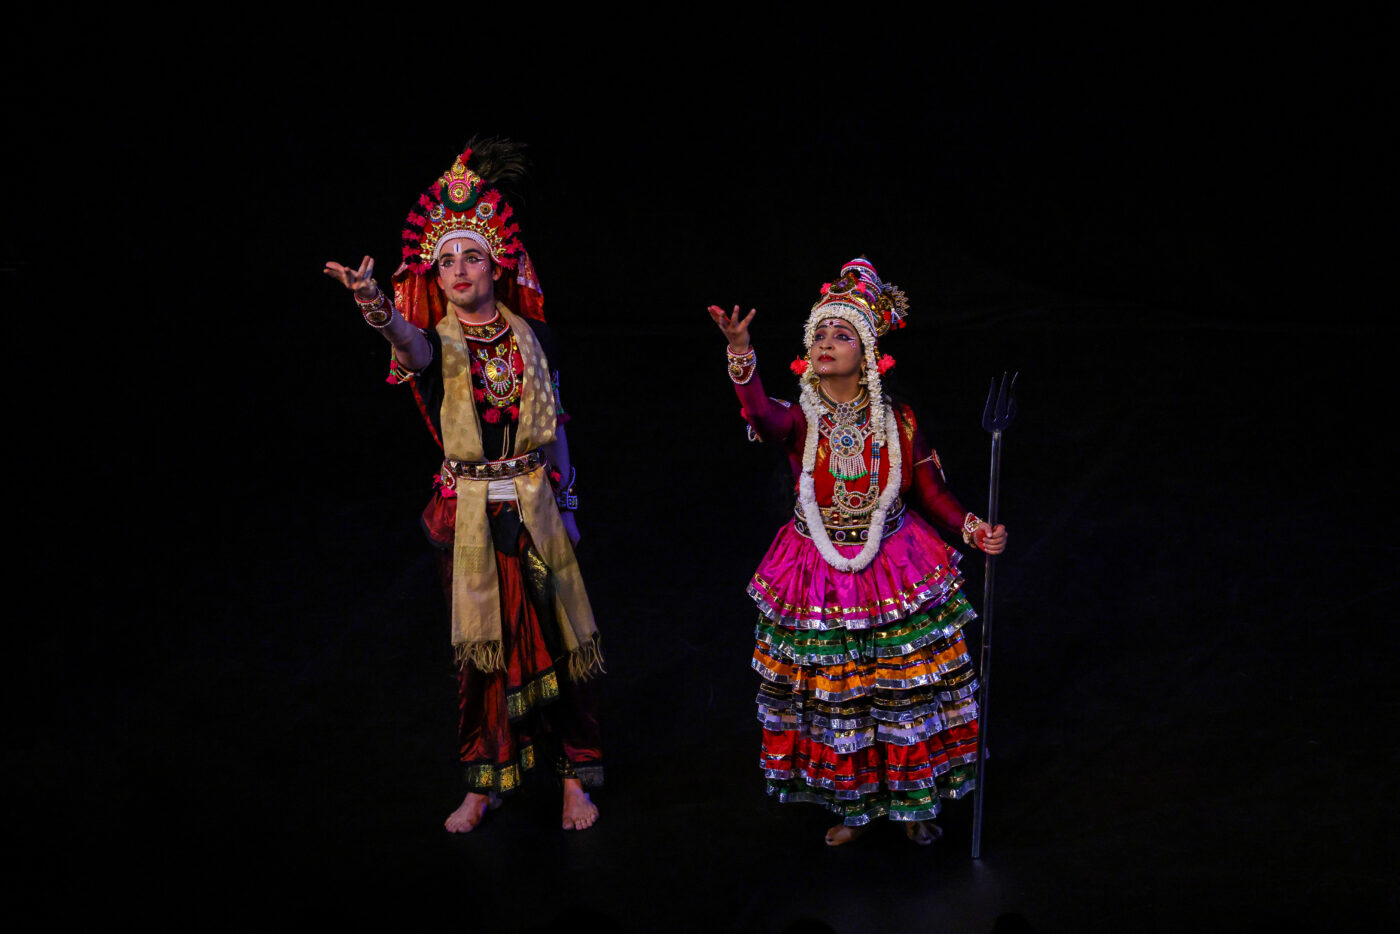 Devika and her dance partner in traditional Indian dress dancing with right arms outstretched.